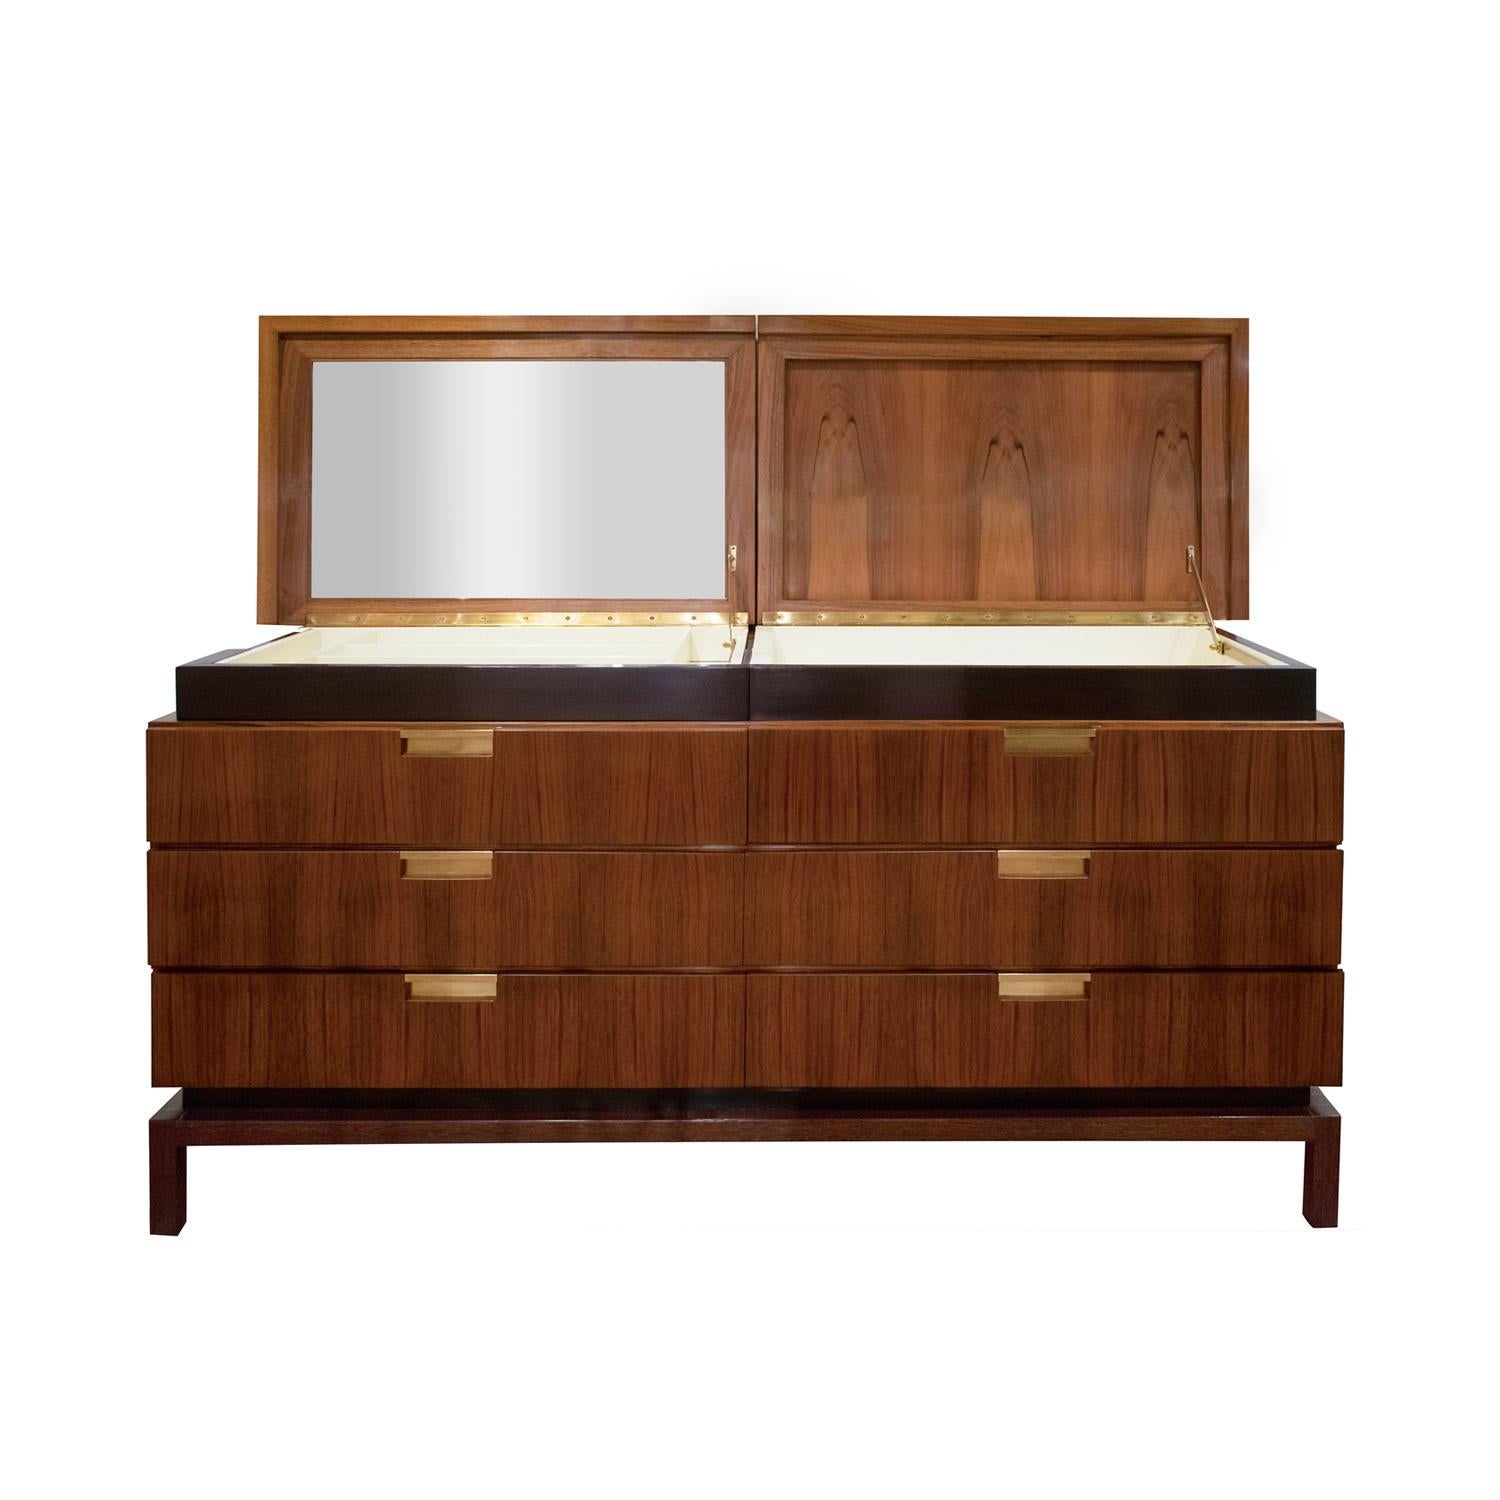 Hand-Crafted De Coene Frères Beautifully Tailored Chest of Drawers with Built-In Vanity 1960s For Sale